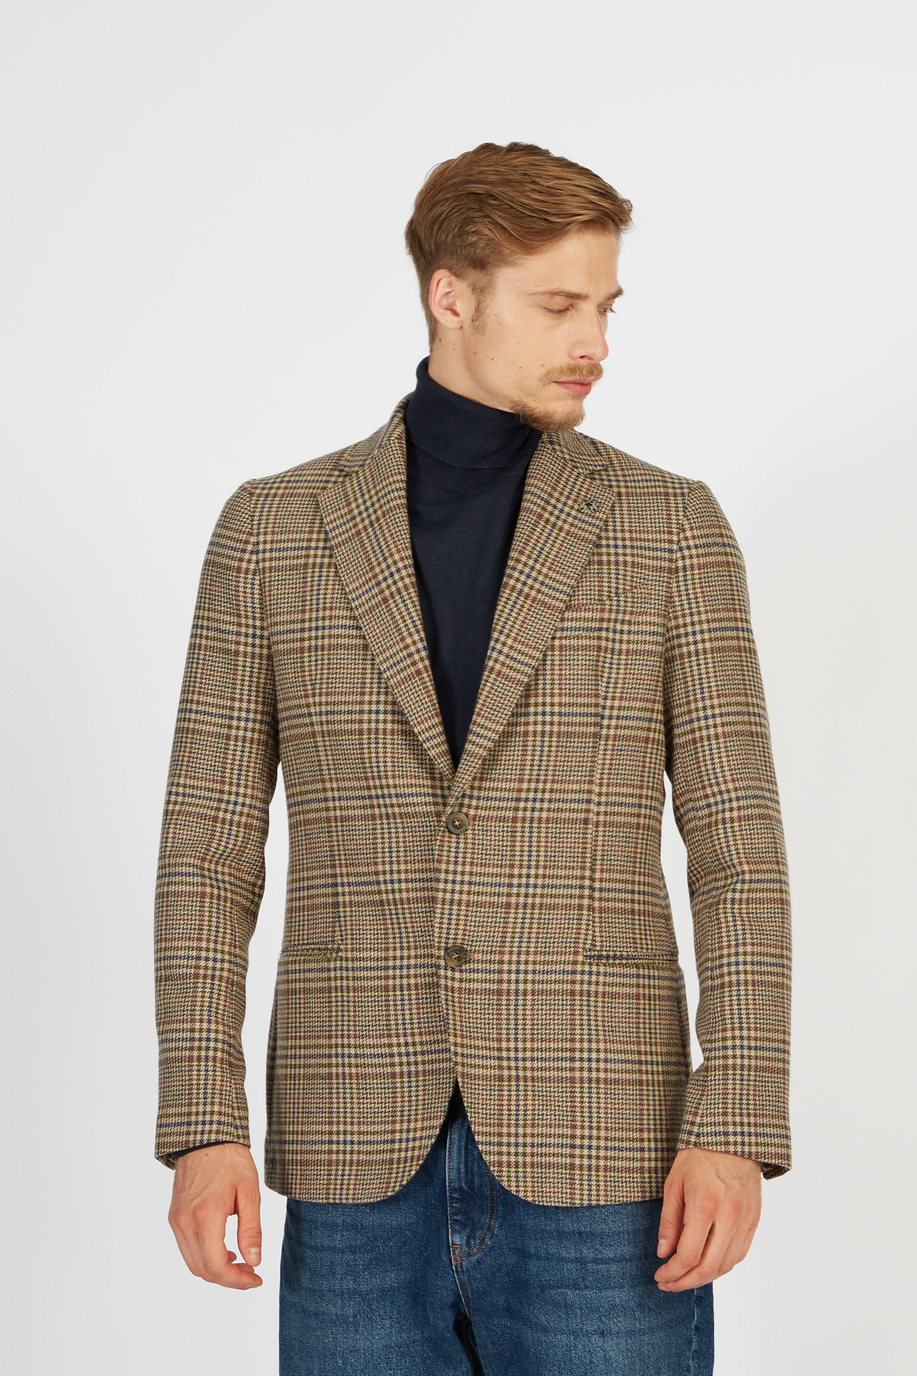 Single-breasted wool blend Blue Ribbon jacket with two regular fit buttons - Elegant looks for him | La Martina - Official Online Shop